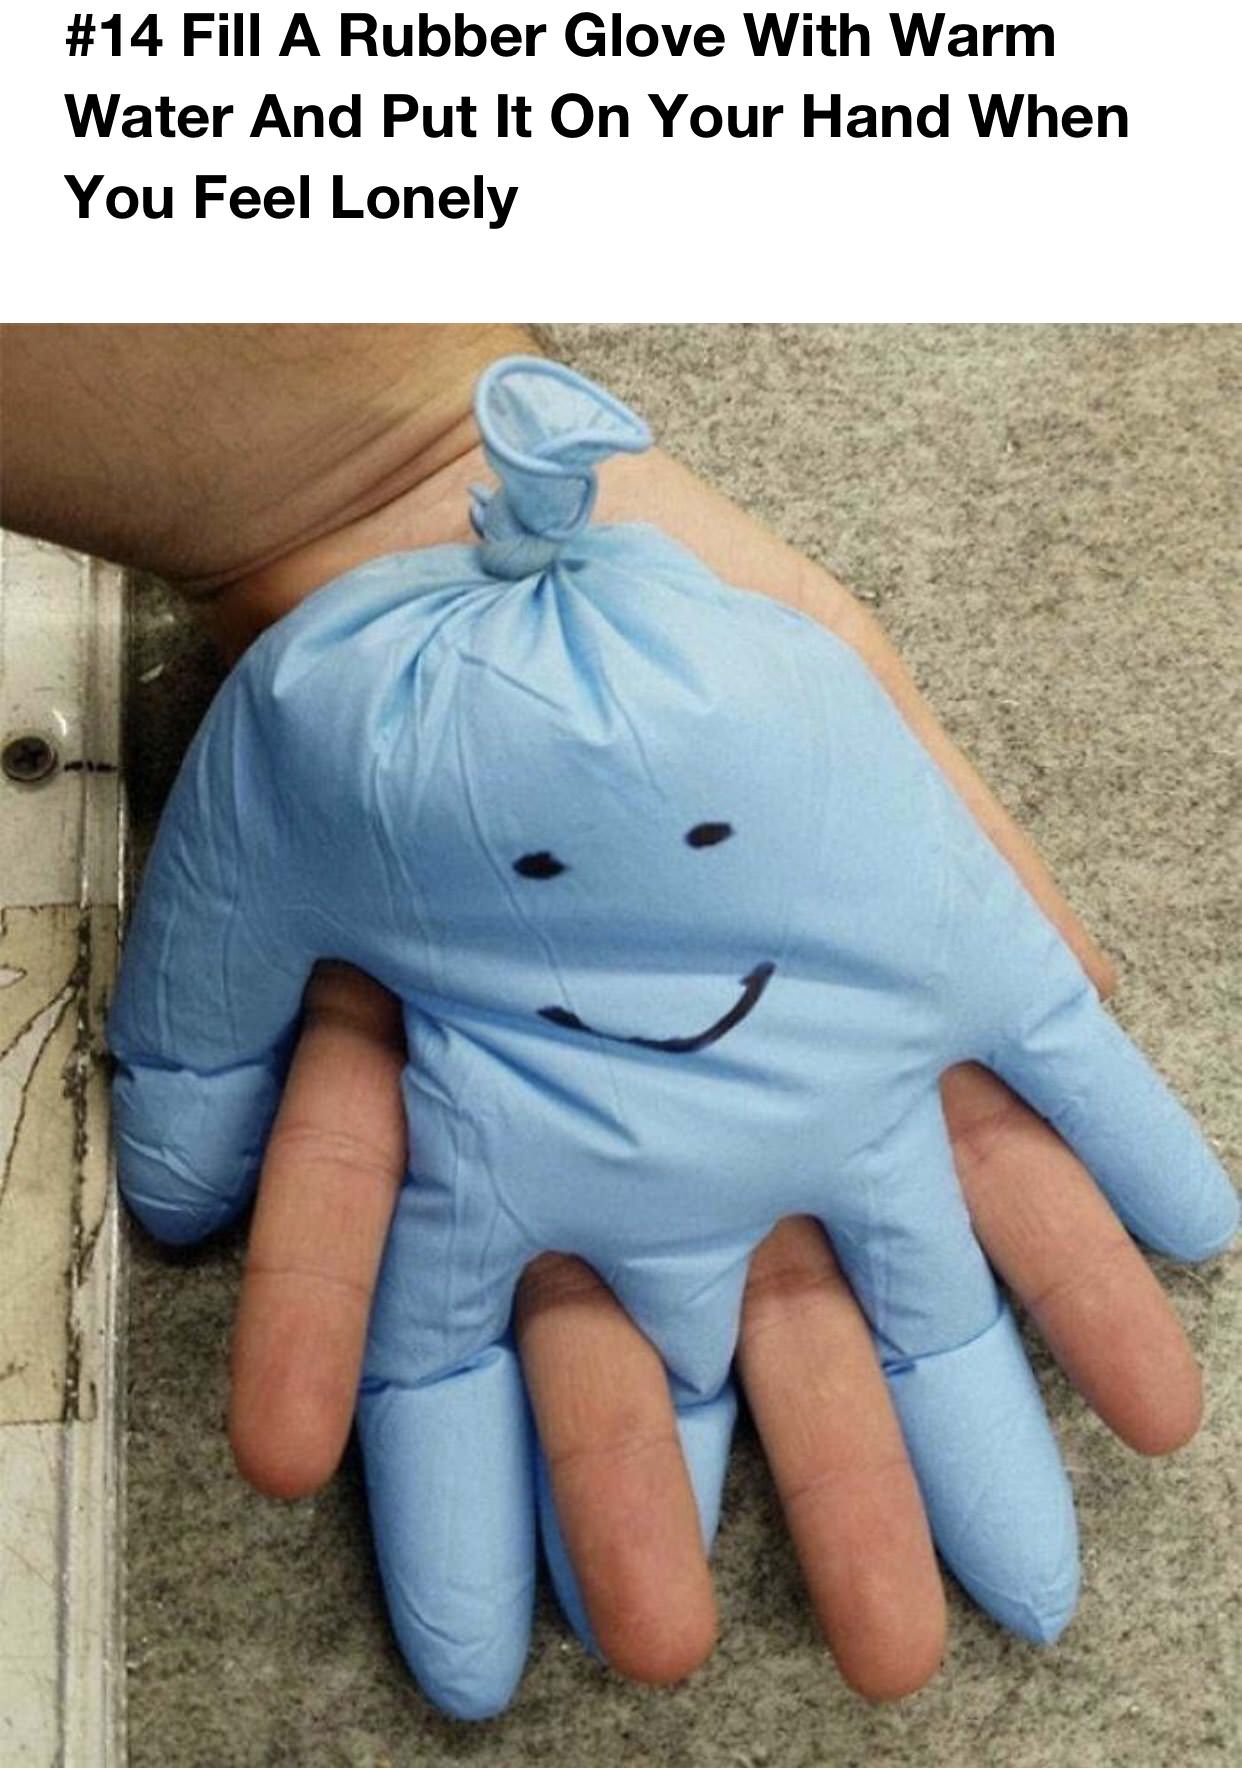 rubber glove filled with water - Fill A Rubber Glove With Warm Water And Put It On Your Hand When You Feel Lonely